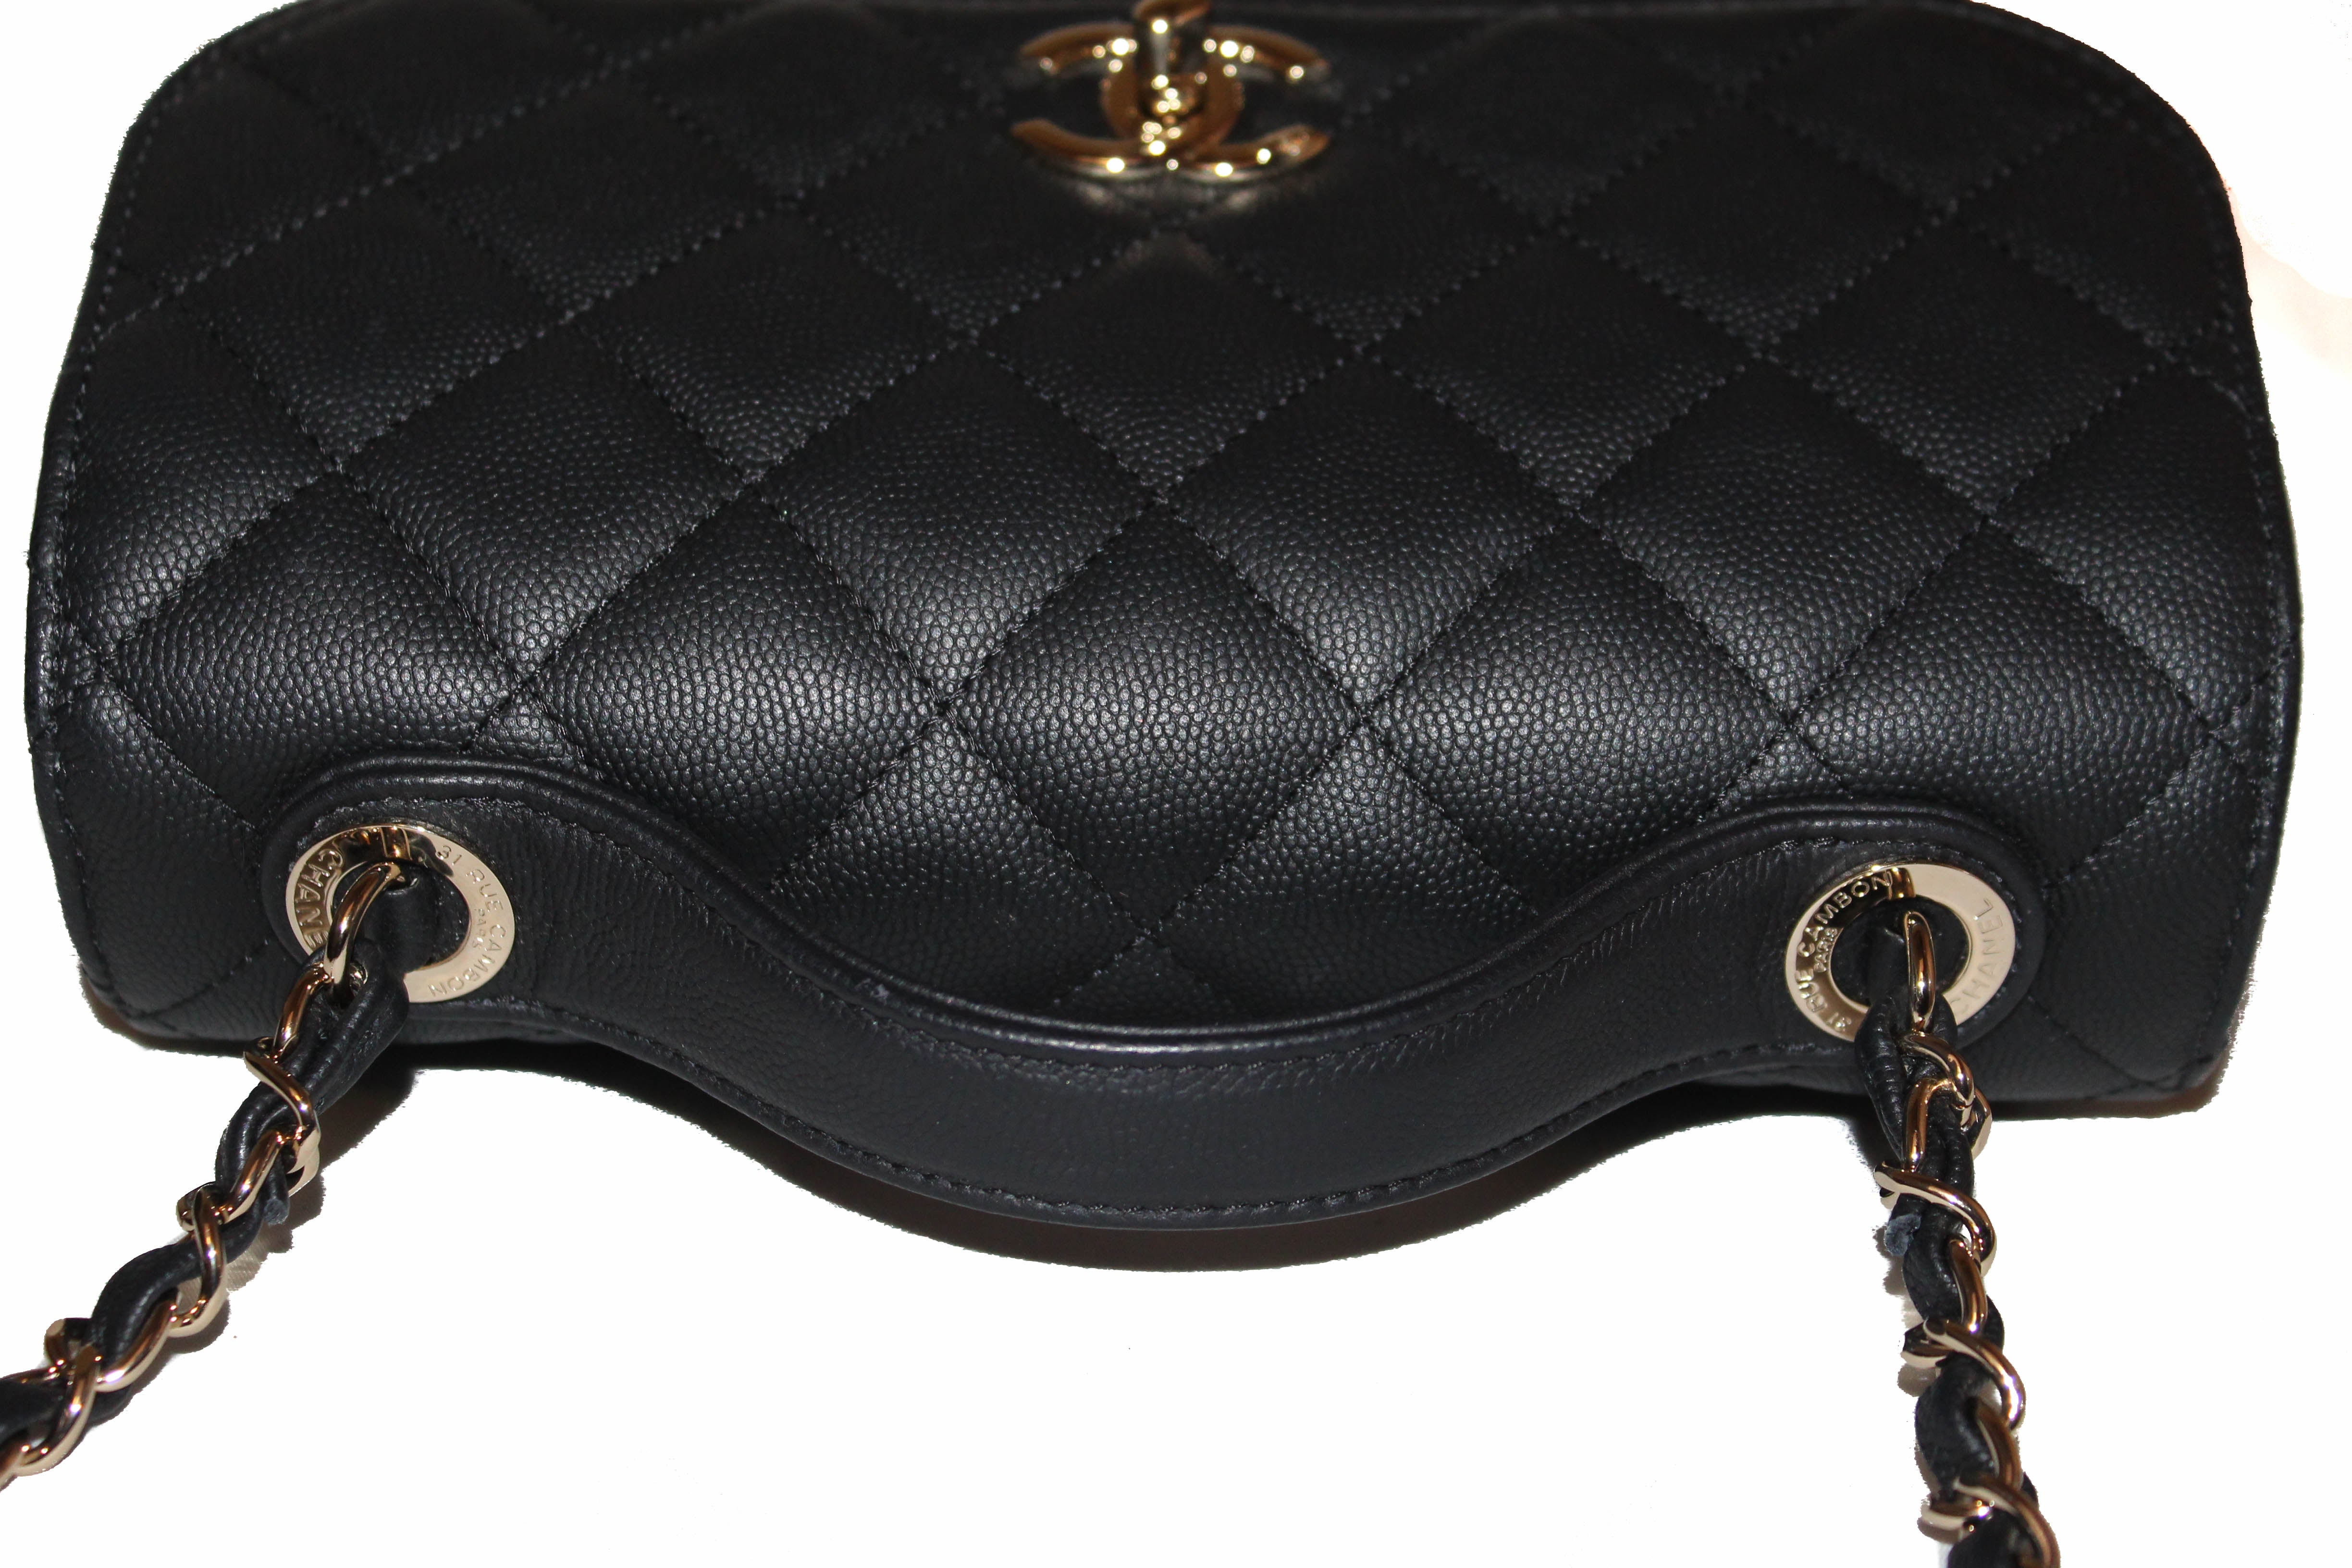 Authentic Chanel Black Caviar Leather Medium Business Affinity Flap Bag  with Top Handle Messenger Bag